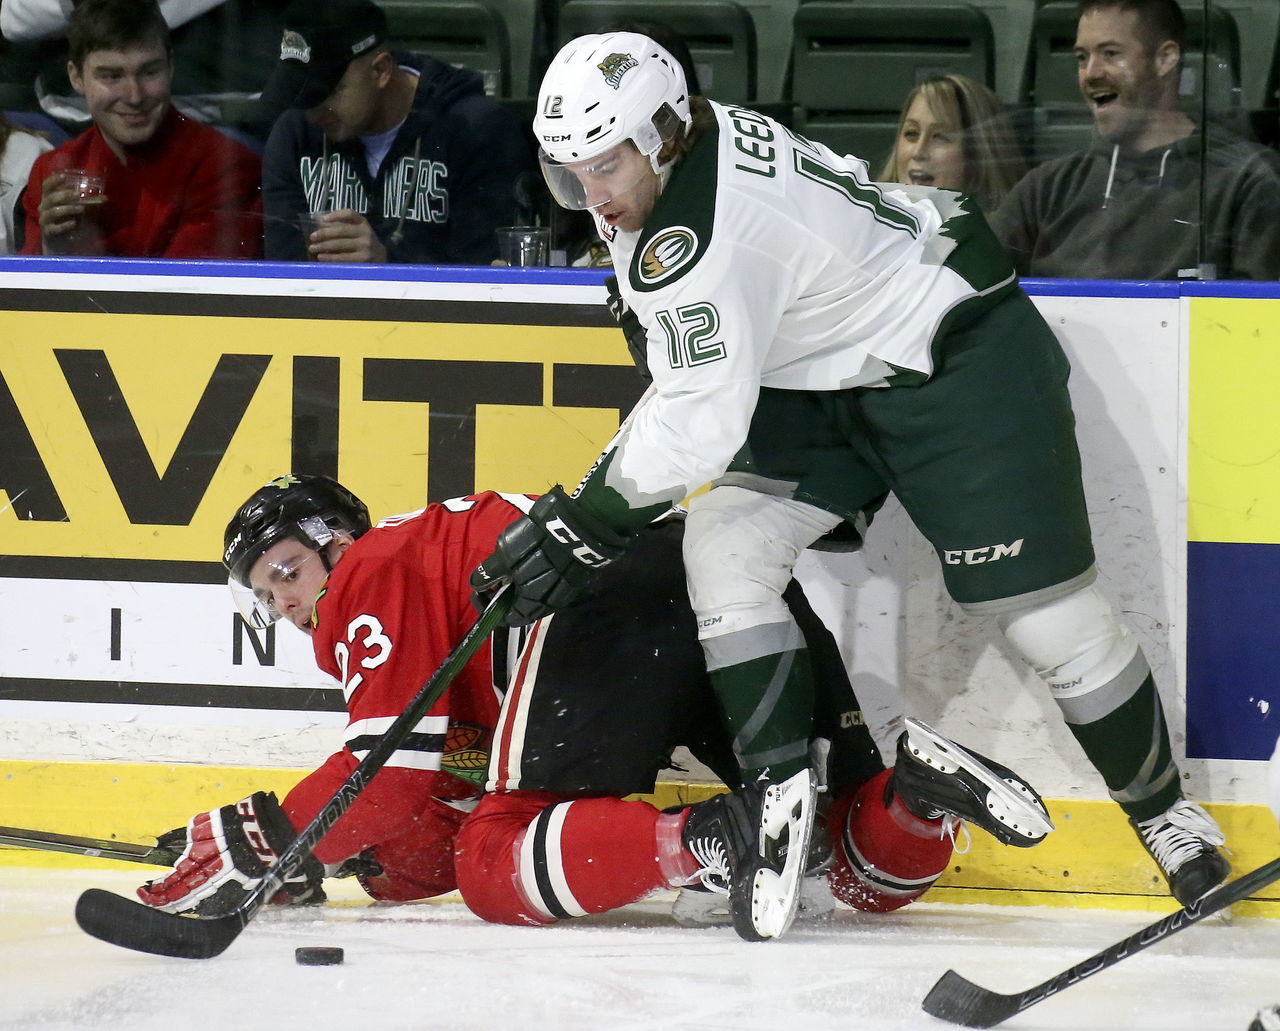 Silvertips captain Dawson Leedahl battles for the puck with the Winterhawks’ Dominic Turgeon during a playoff game March 25 at Xfinity Arena.